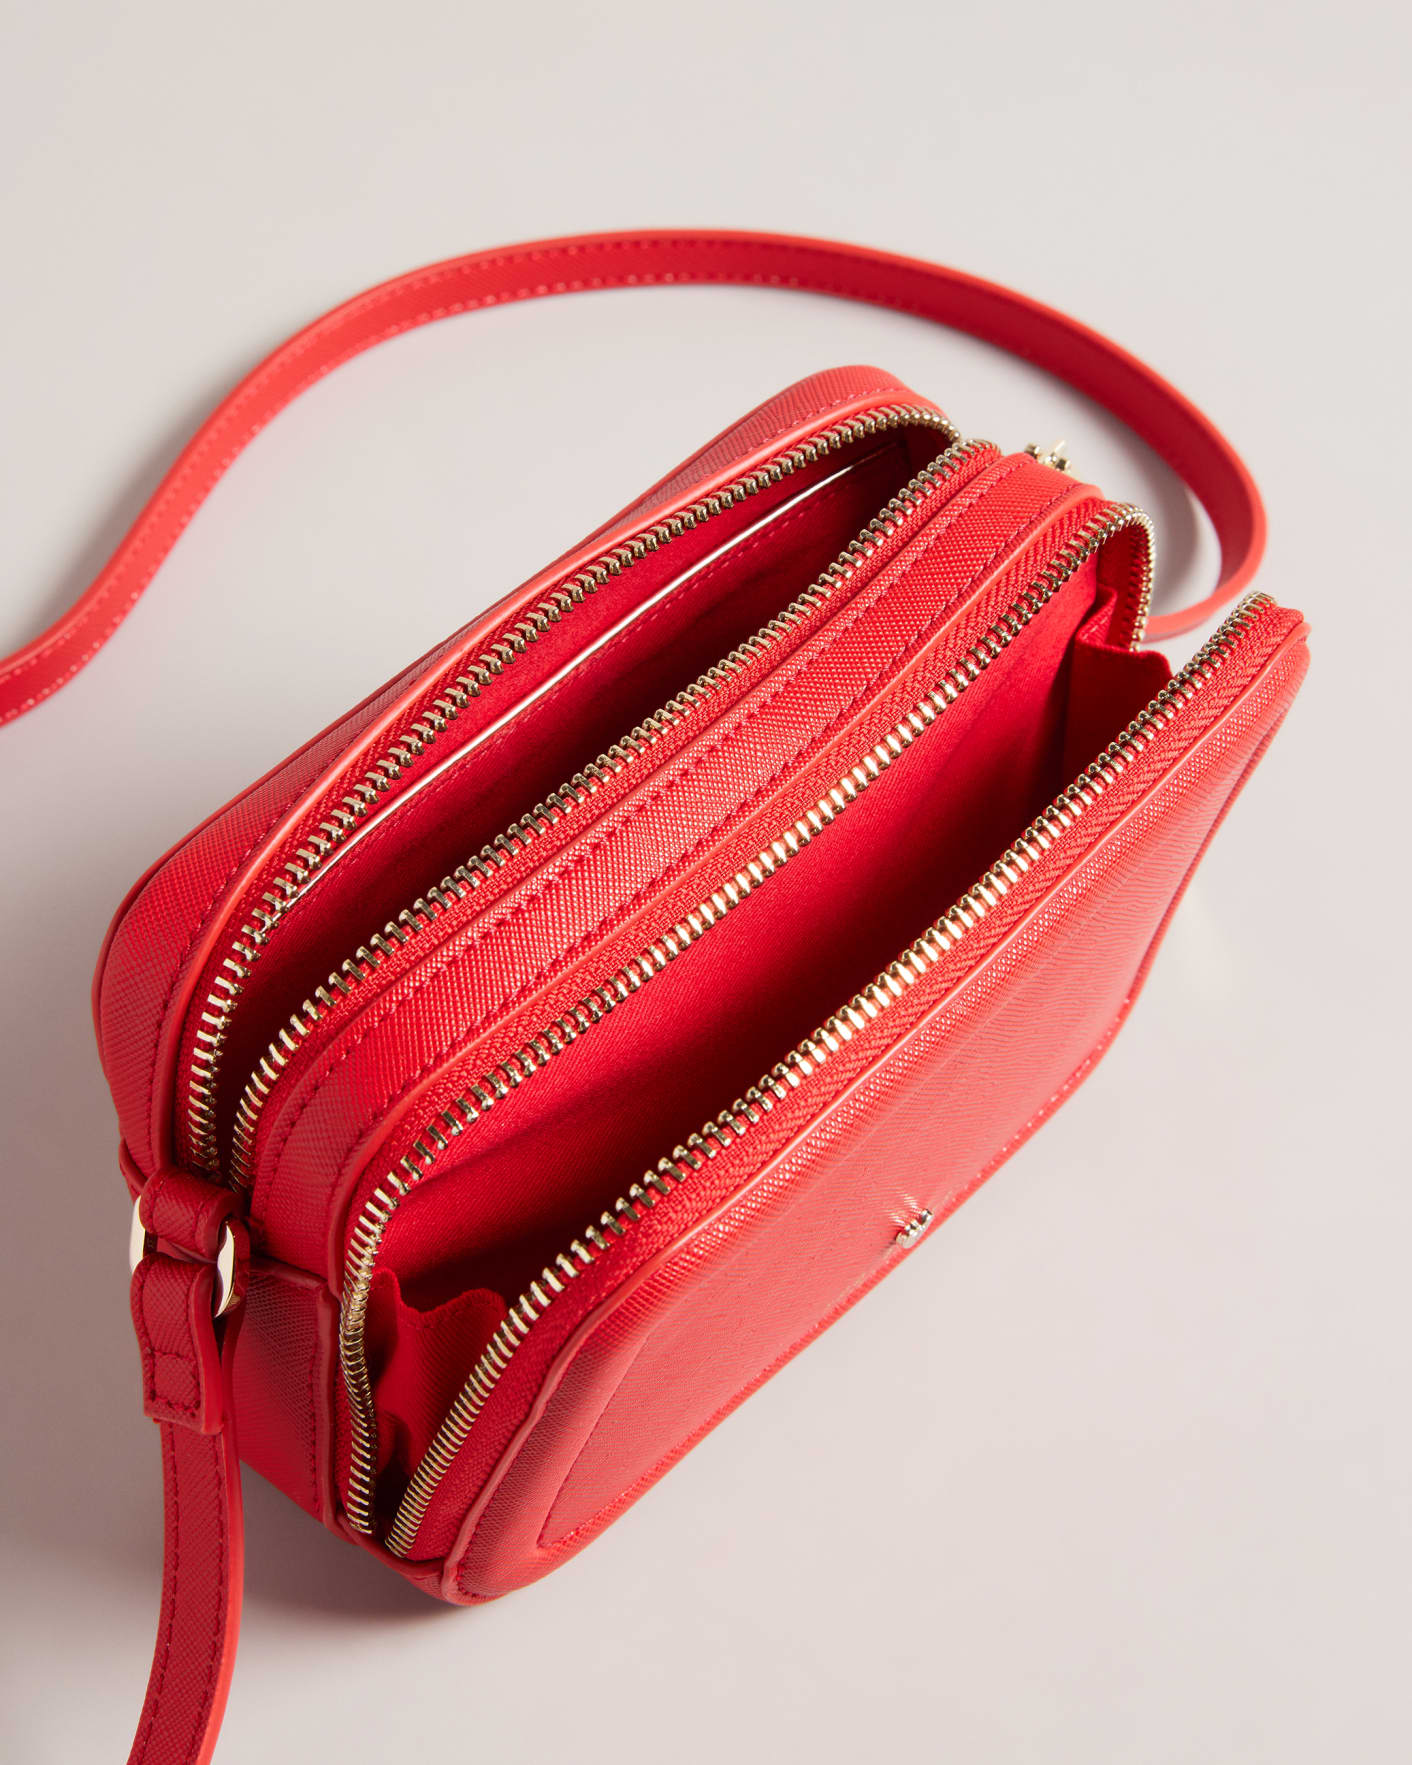 STINAH - RED Bags | Ted Baker US